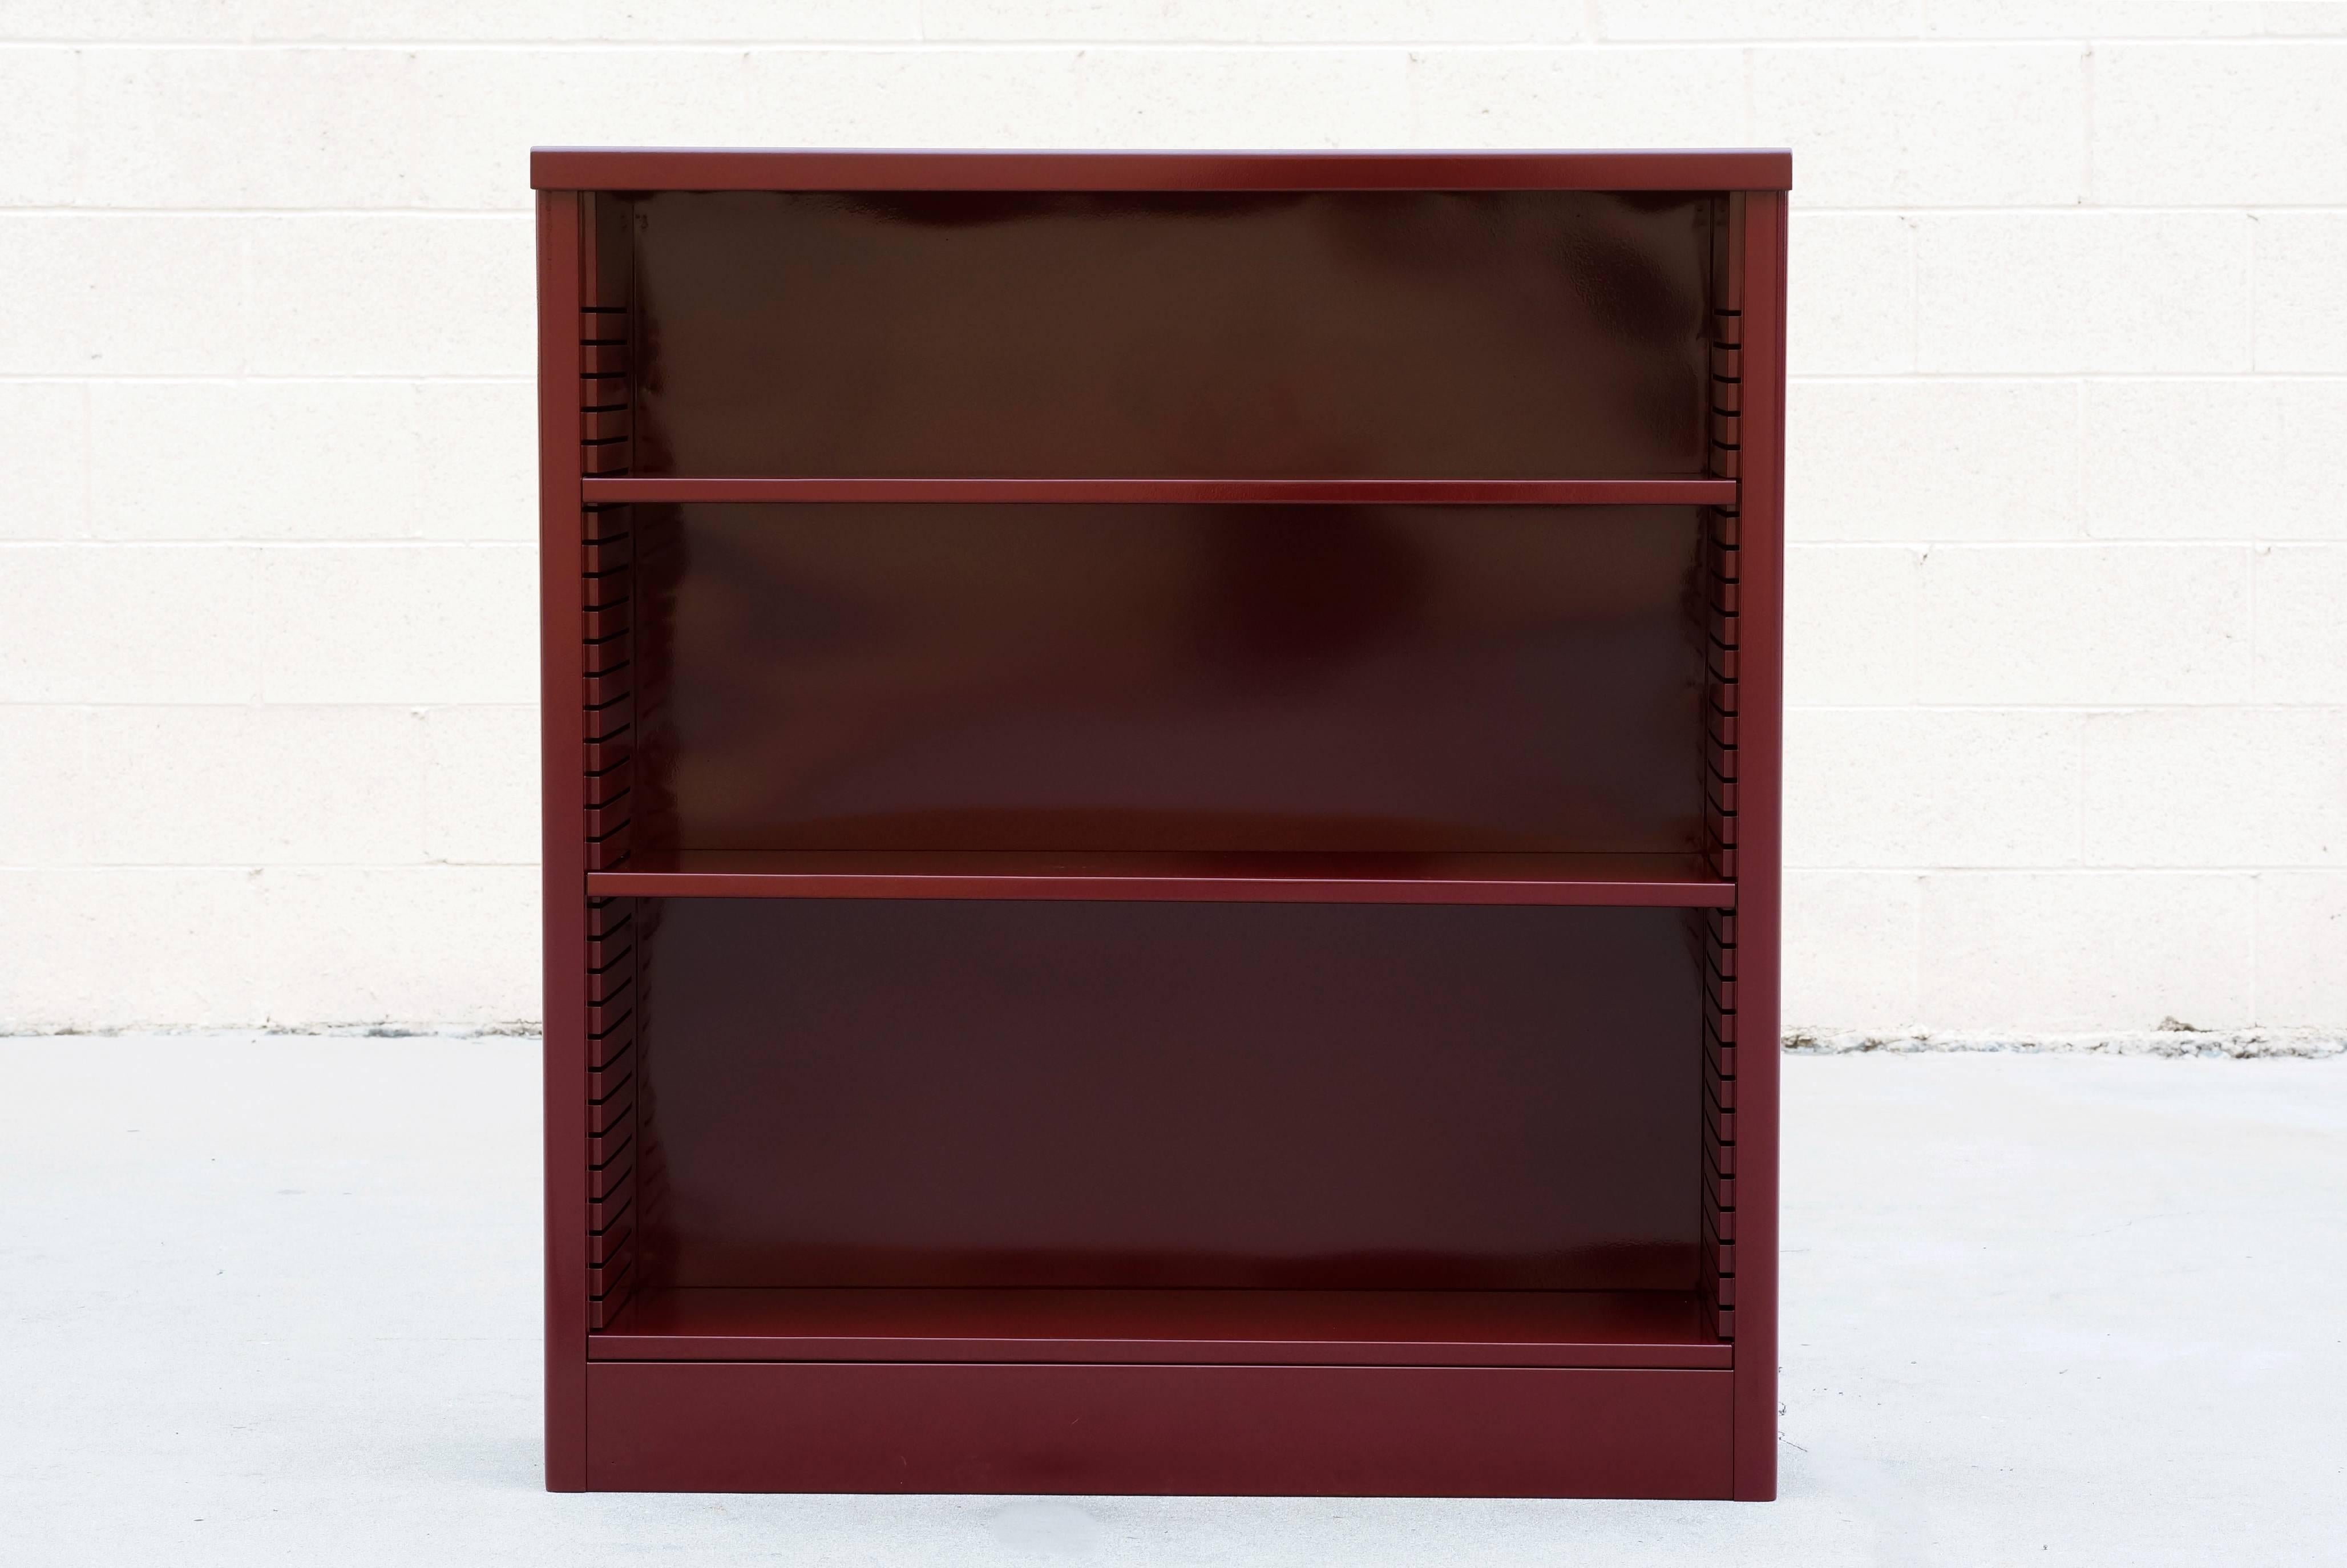 Neat 1960s tanker style steel bookcase freshly powder coated in high gloss wine red. Originally used in the UCLA math department, this adjustable three-shelf unit is an excellent storage option– its sleek and compact, yet holds many books. It's